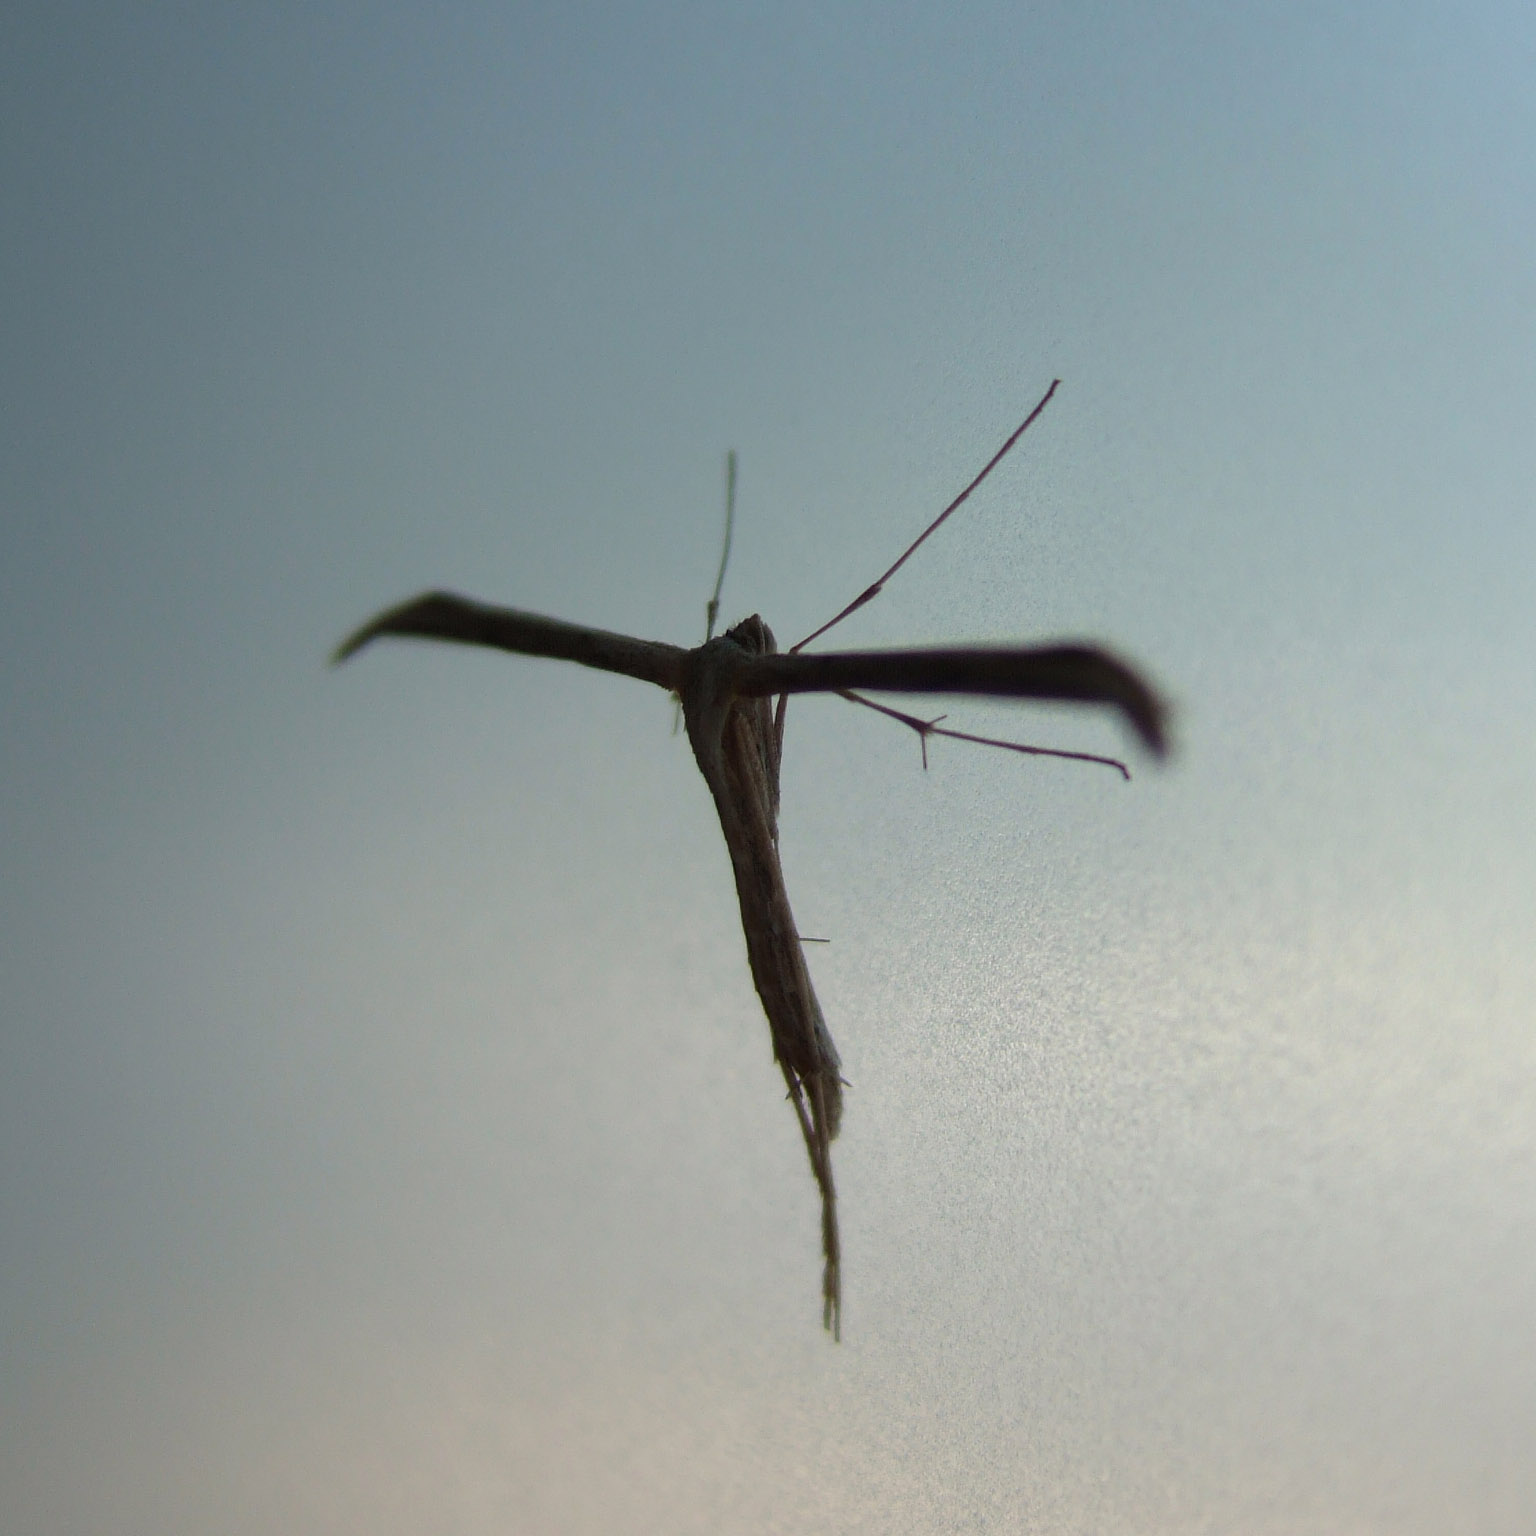 a erfly flies in the air during a cloudy day